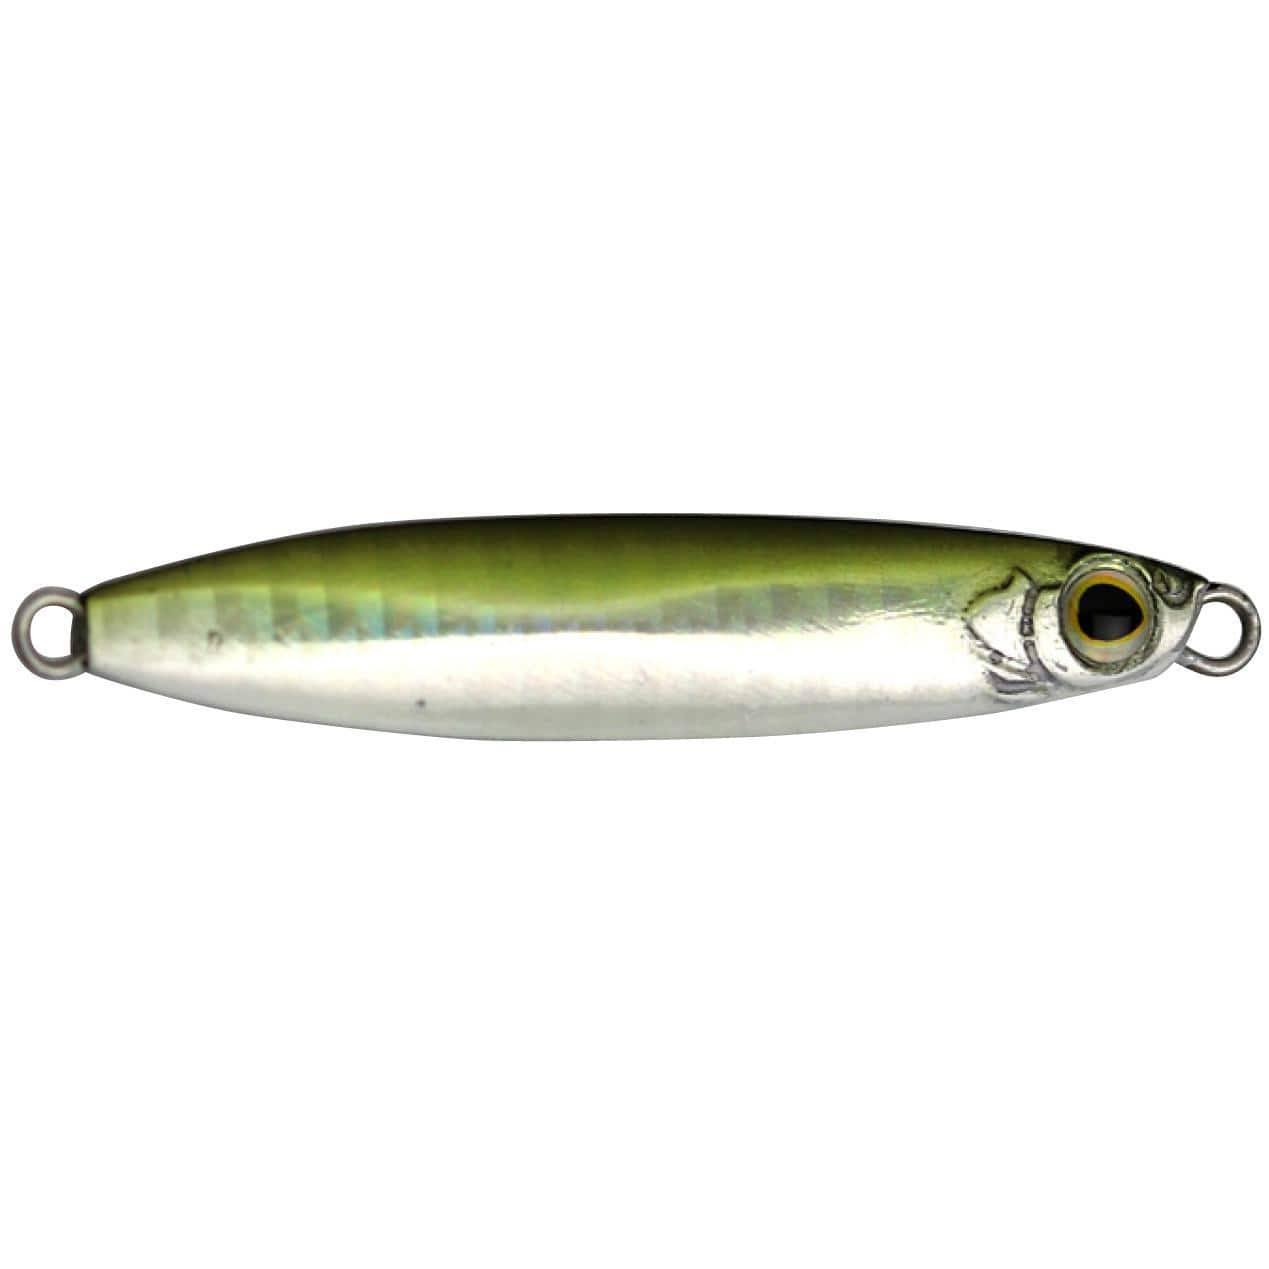 Shimano Coltsniper Jig Slow Fall Lure | Boating & Fishing | Free Shipping On All Orders | Best Price Guarantee | 30 Day Money Back Guarantee